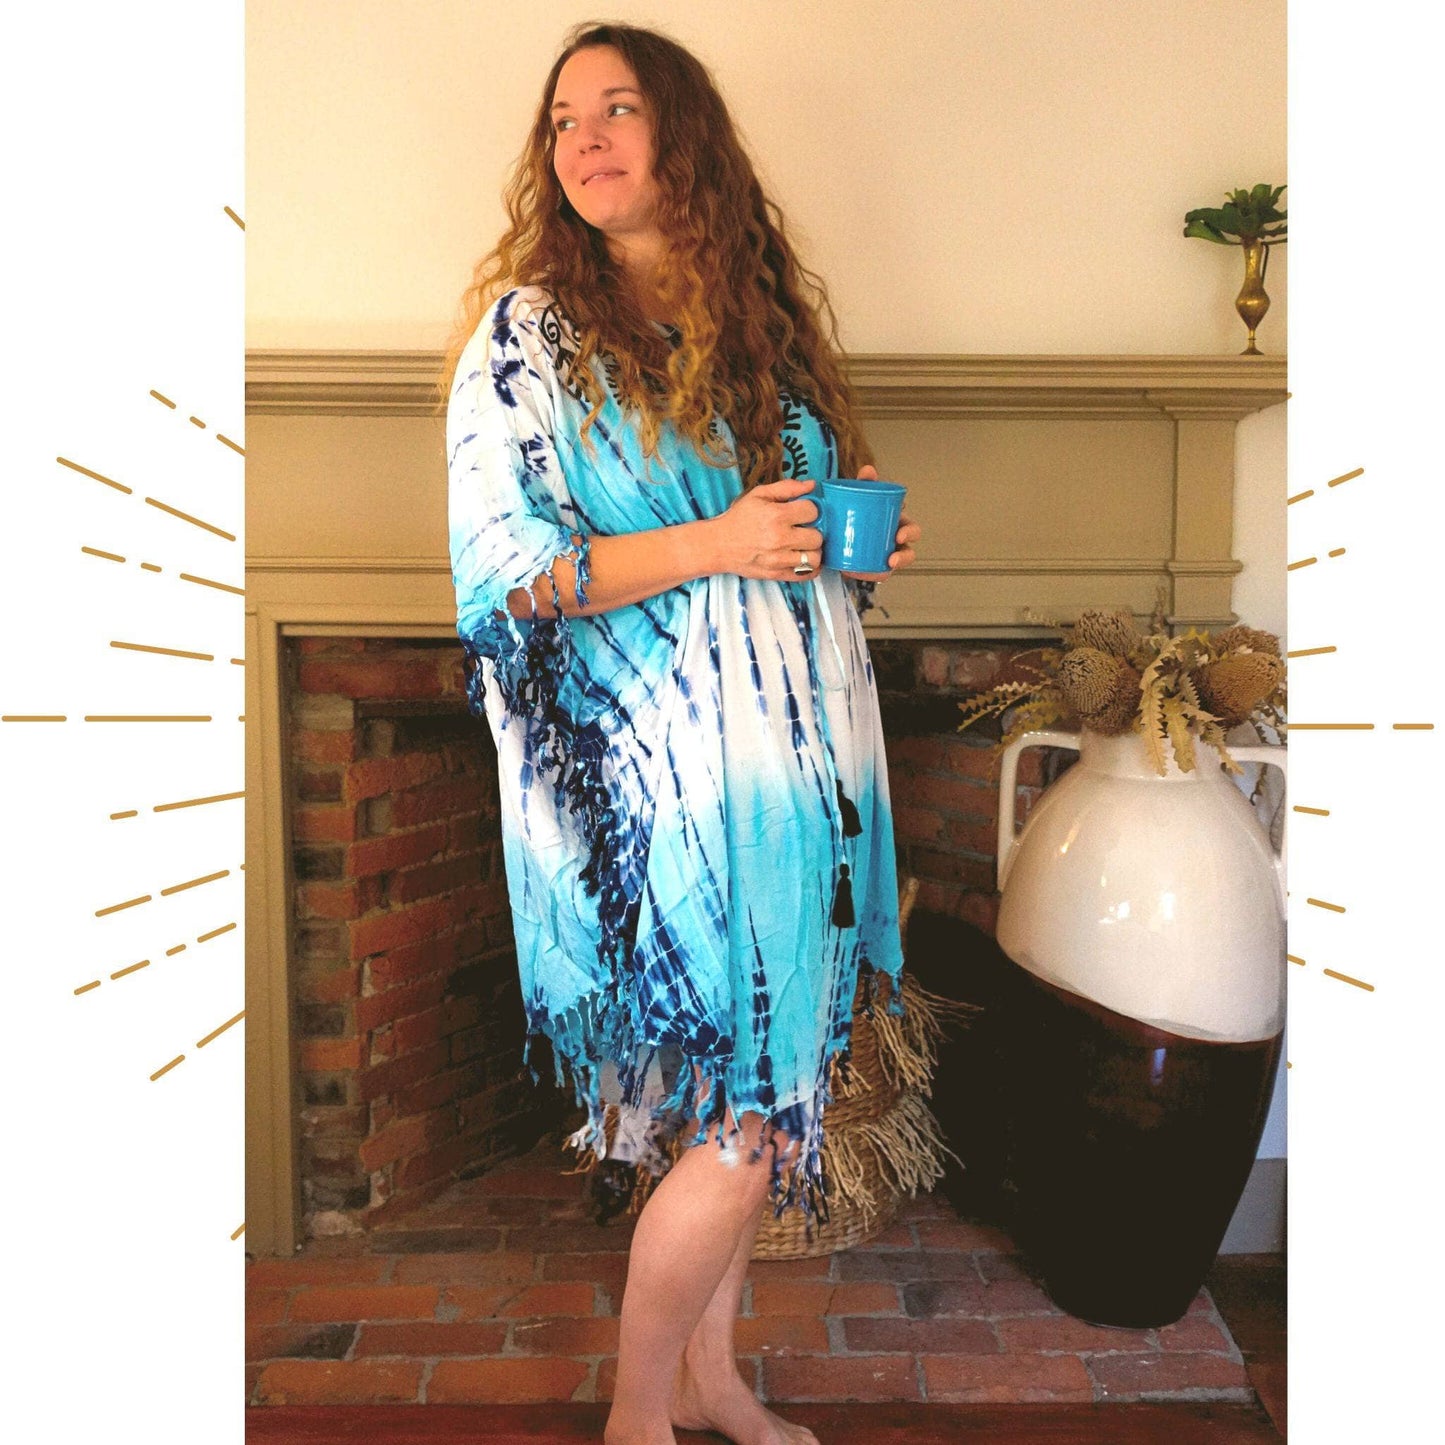 Nicole Snow wearing the tie dye sleep tunic in front of a fireplace while holding a mug.